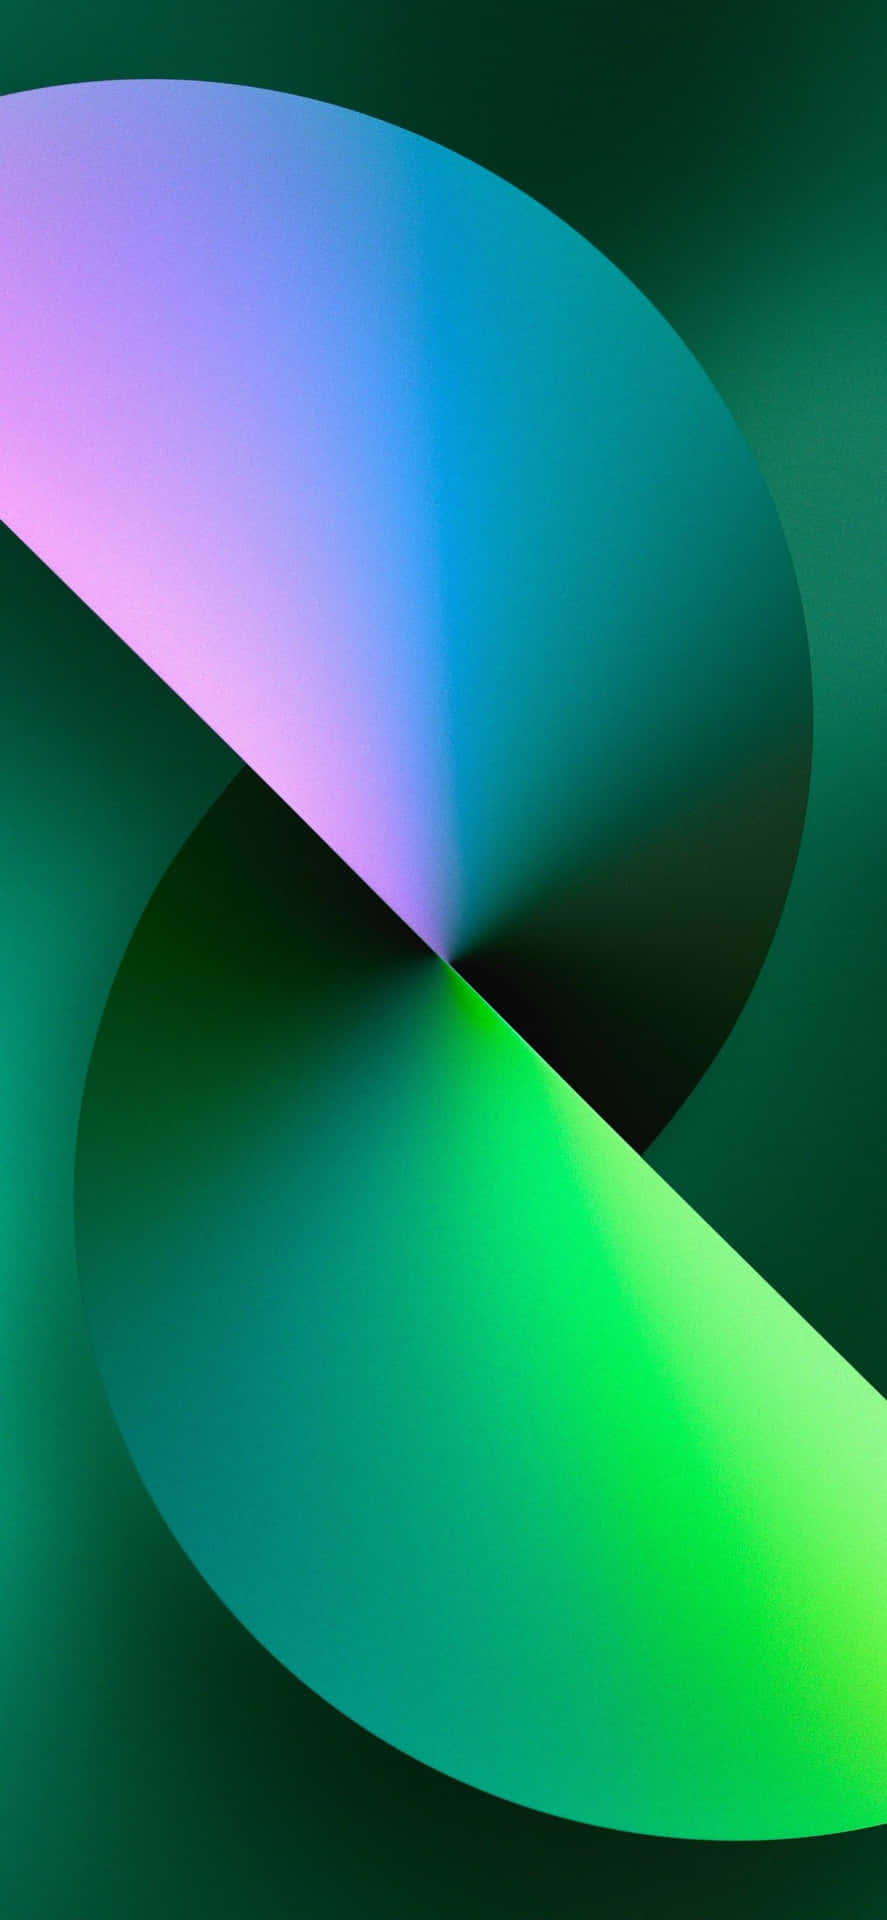 A Green And Purple Abstract Design Wallpaper